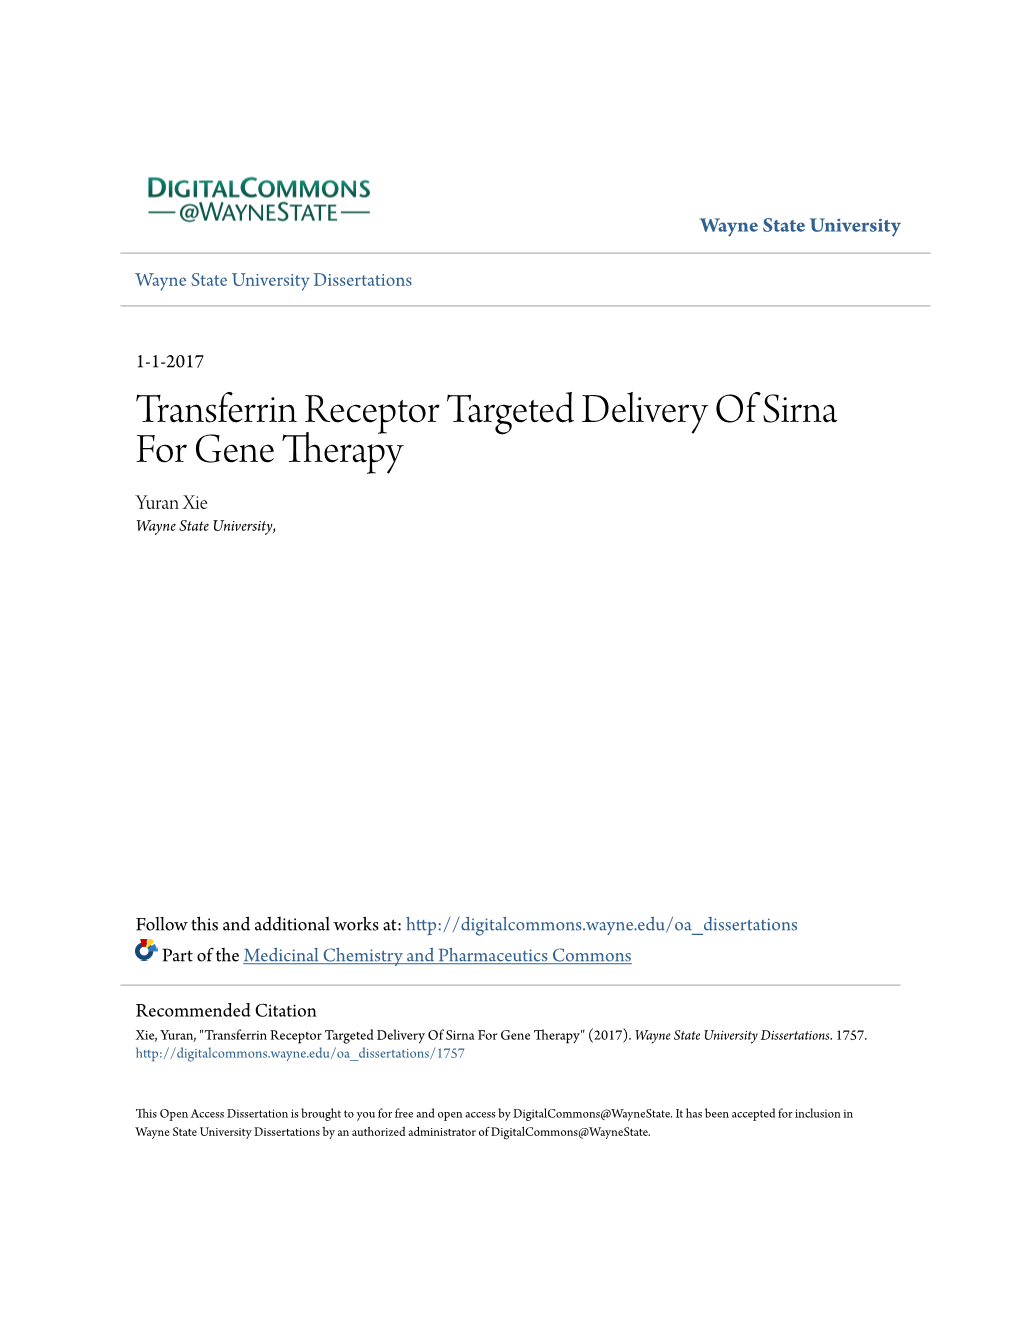 Transferrin Receptor Targeted Delivery of Sirna for Gene Therapy Yuran Xie Wayne State University